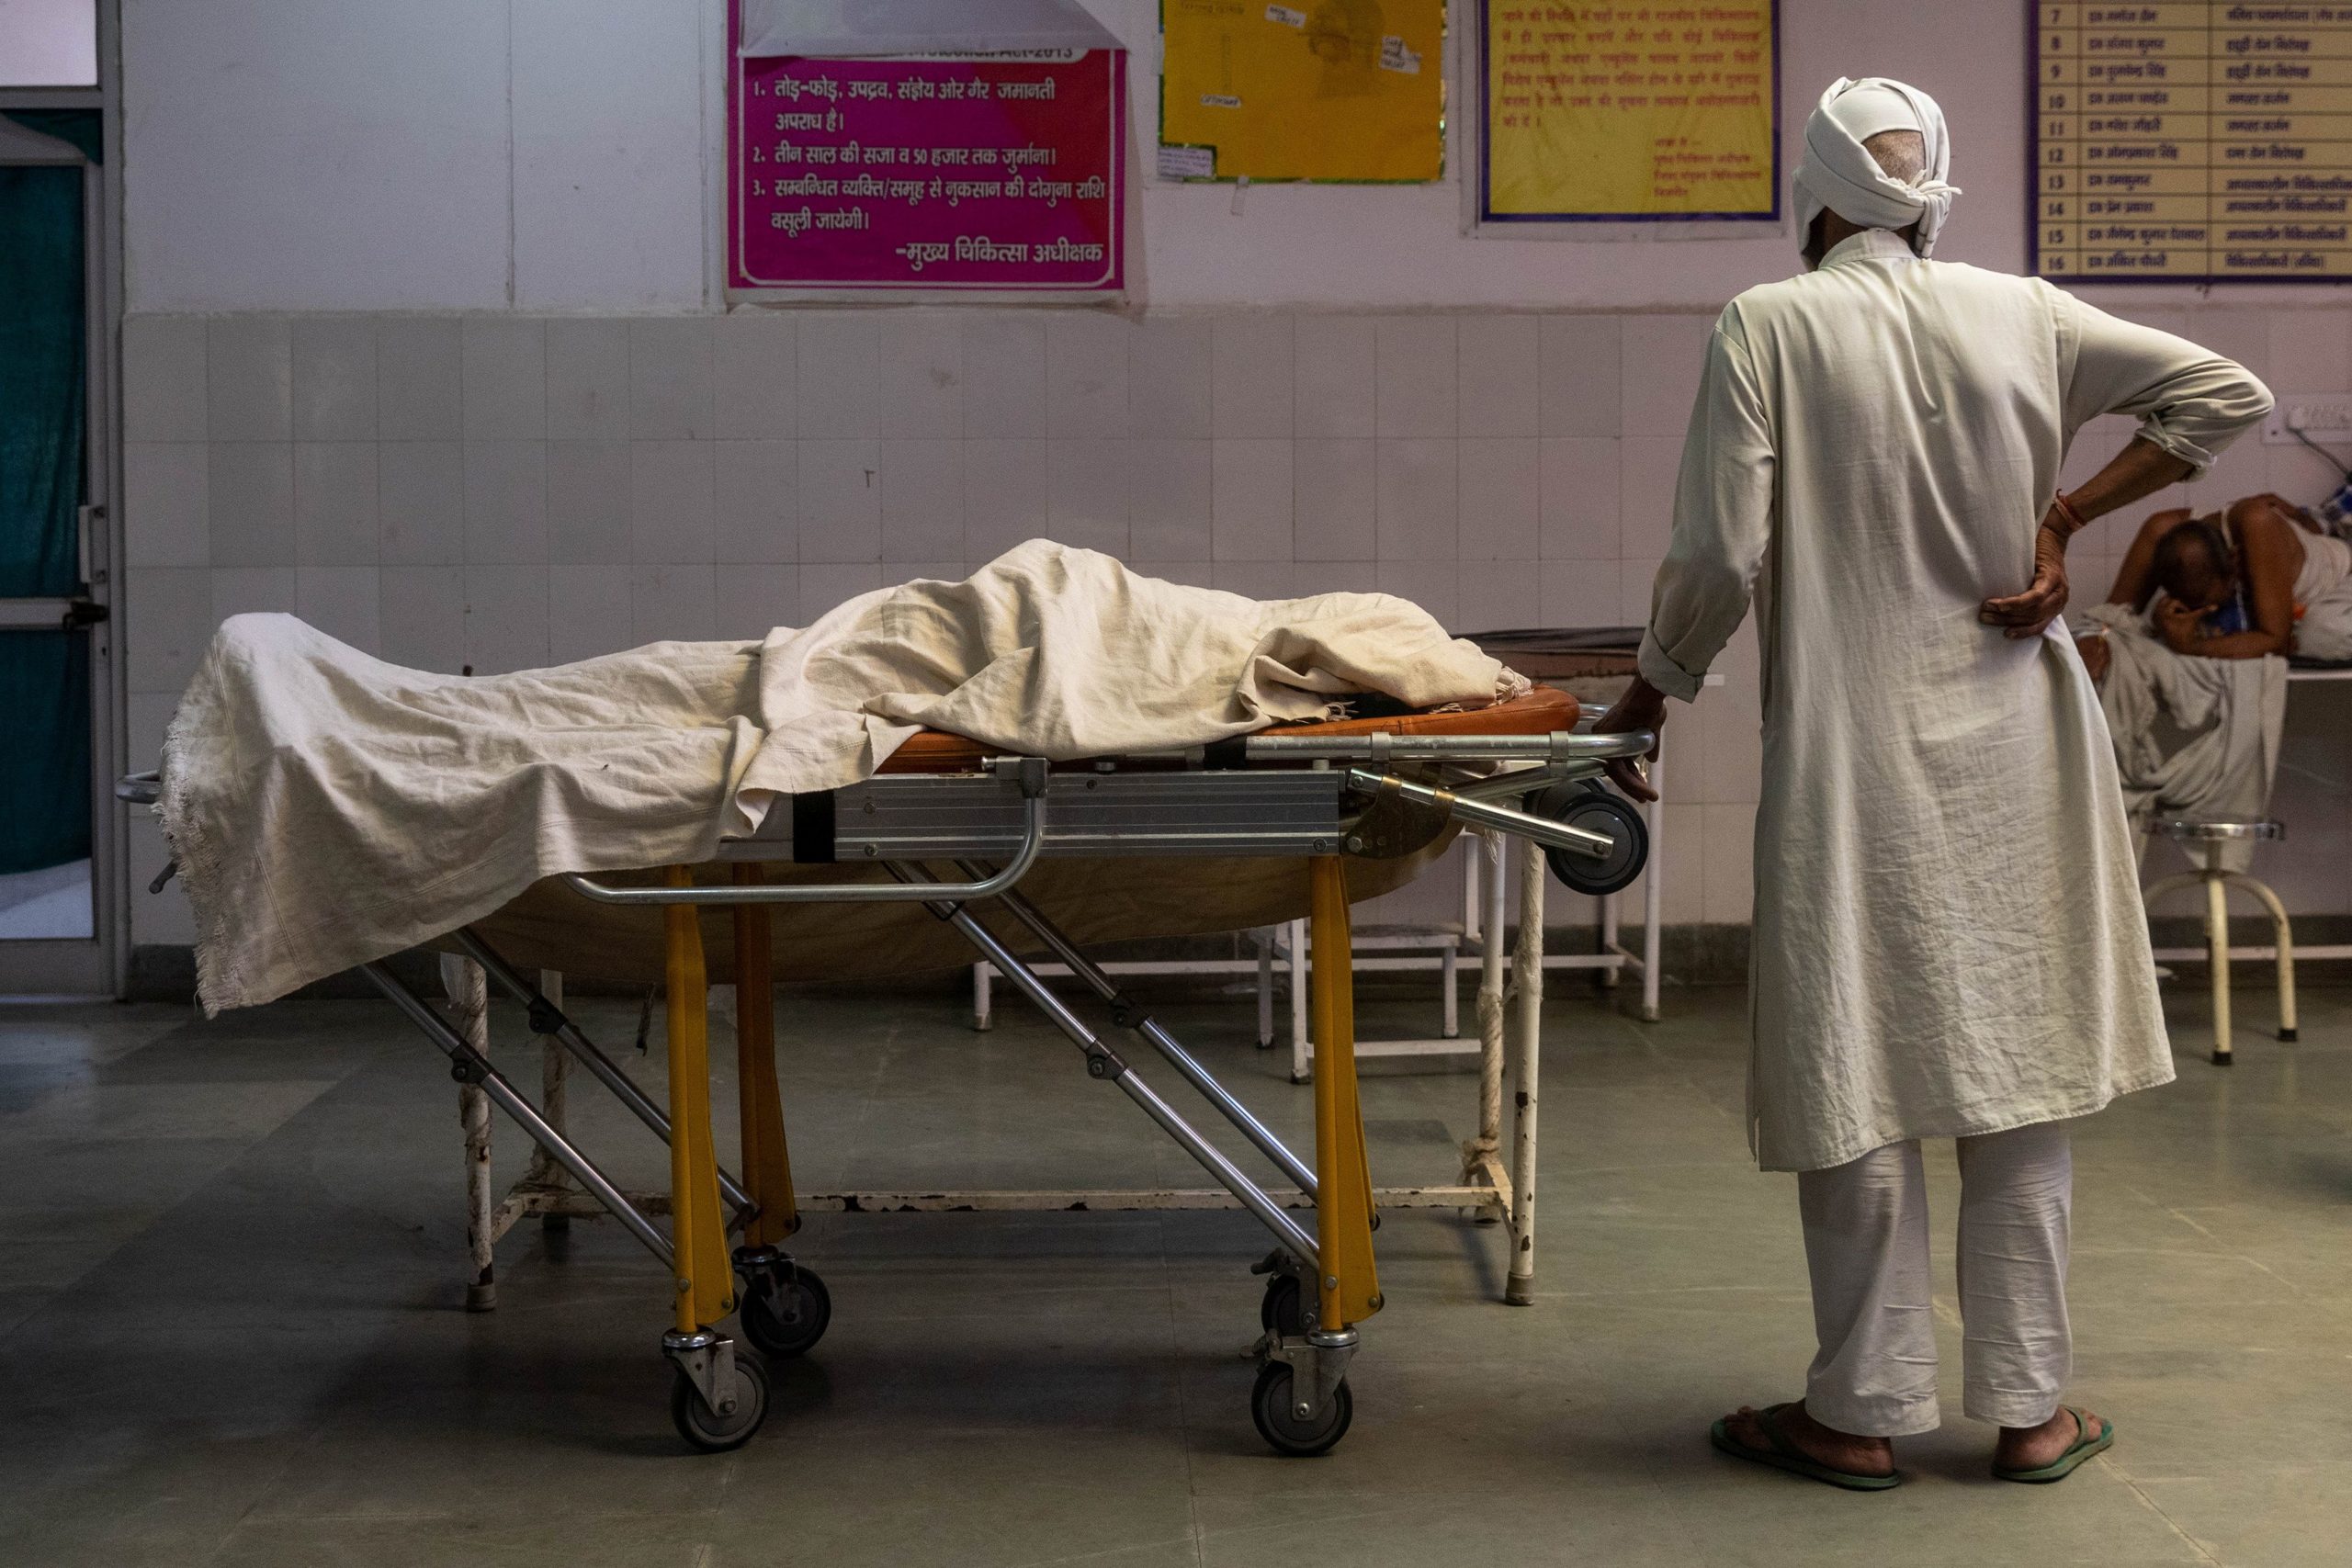 A man stands next to the body of his wife, who died due to breathing difficulties, inside an emergency ward of a government-run hospital, amidst the coronavirus disease (COVID-19) pandemic, in Bijnor, Uttar Pradesh, India, May 11, 2021. REUTERS/Danish Siddiqui